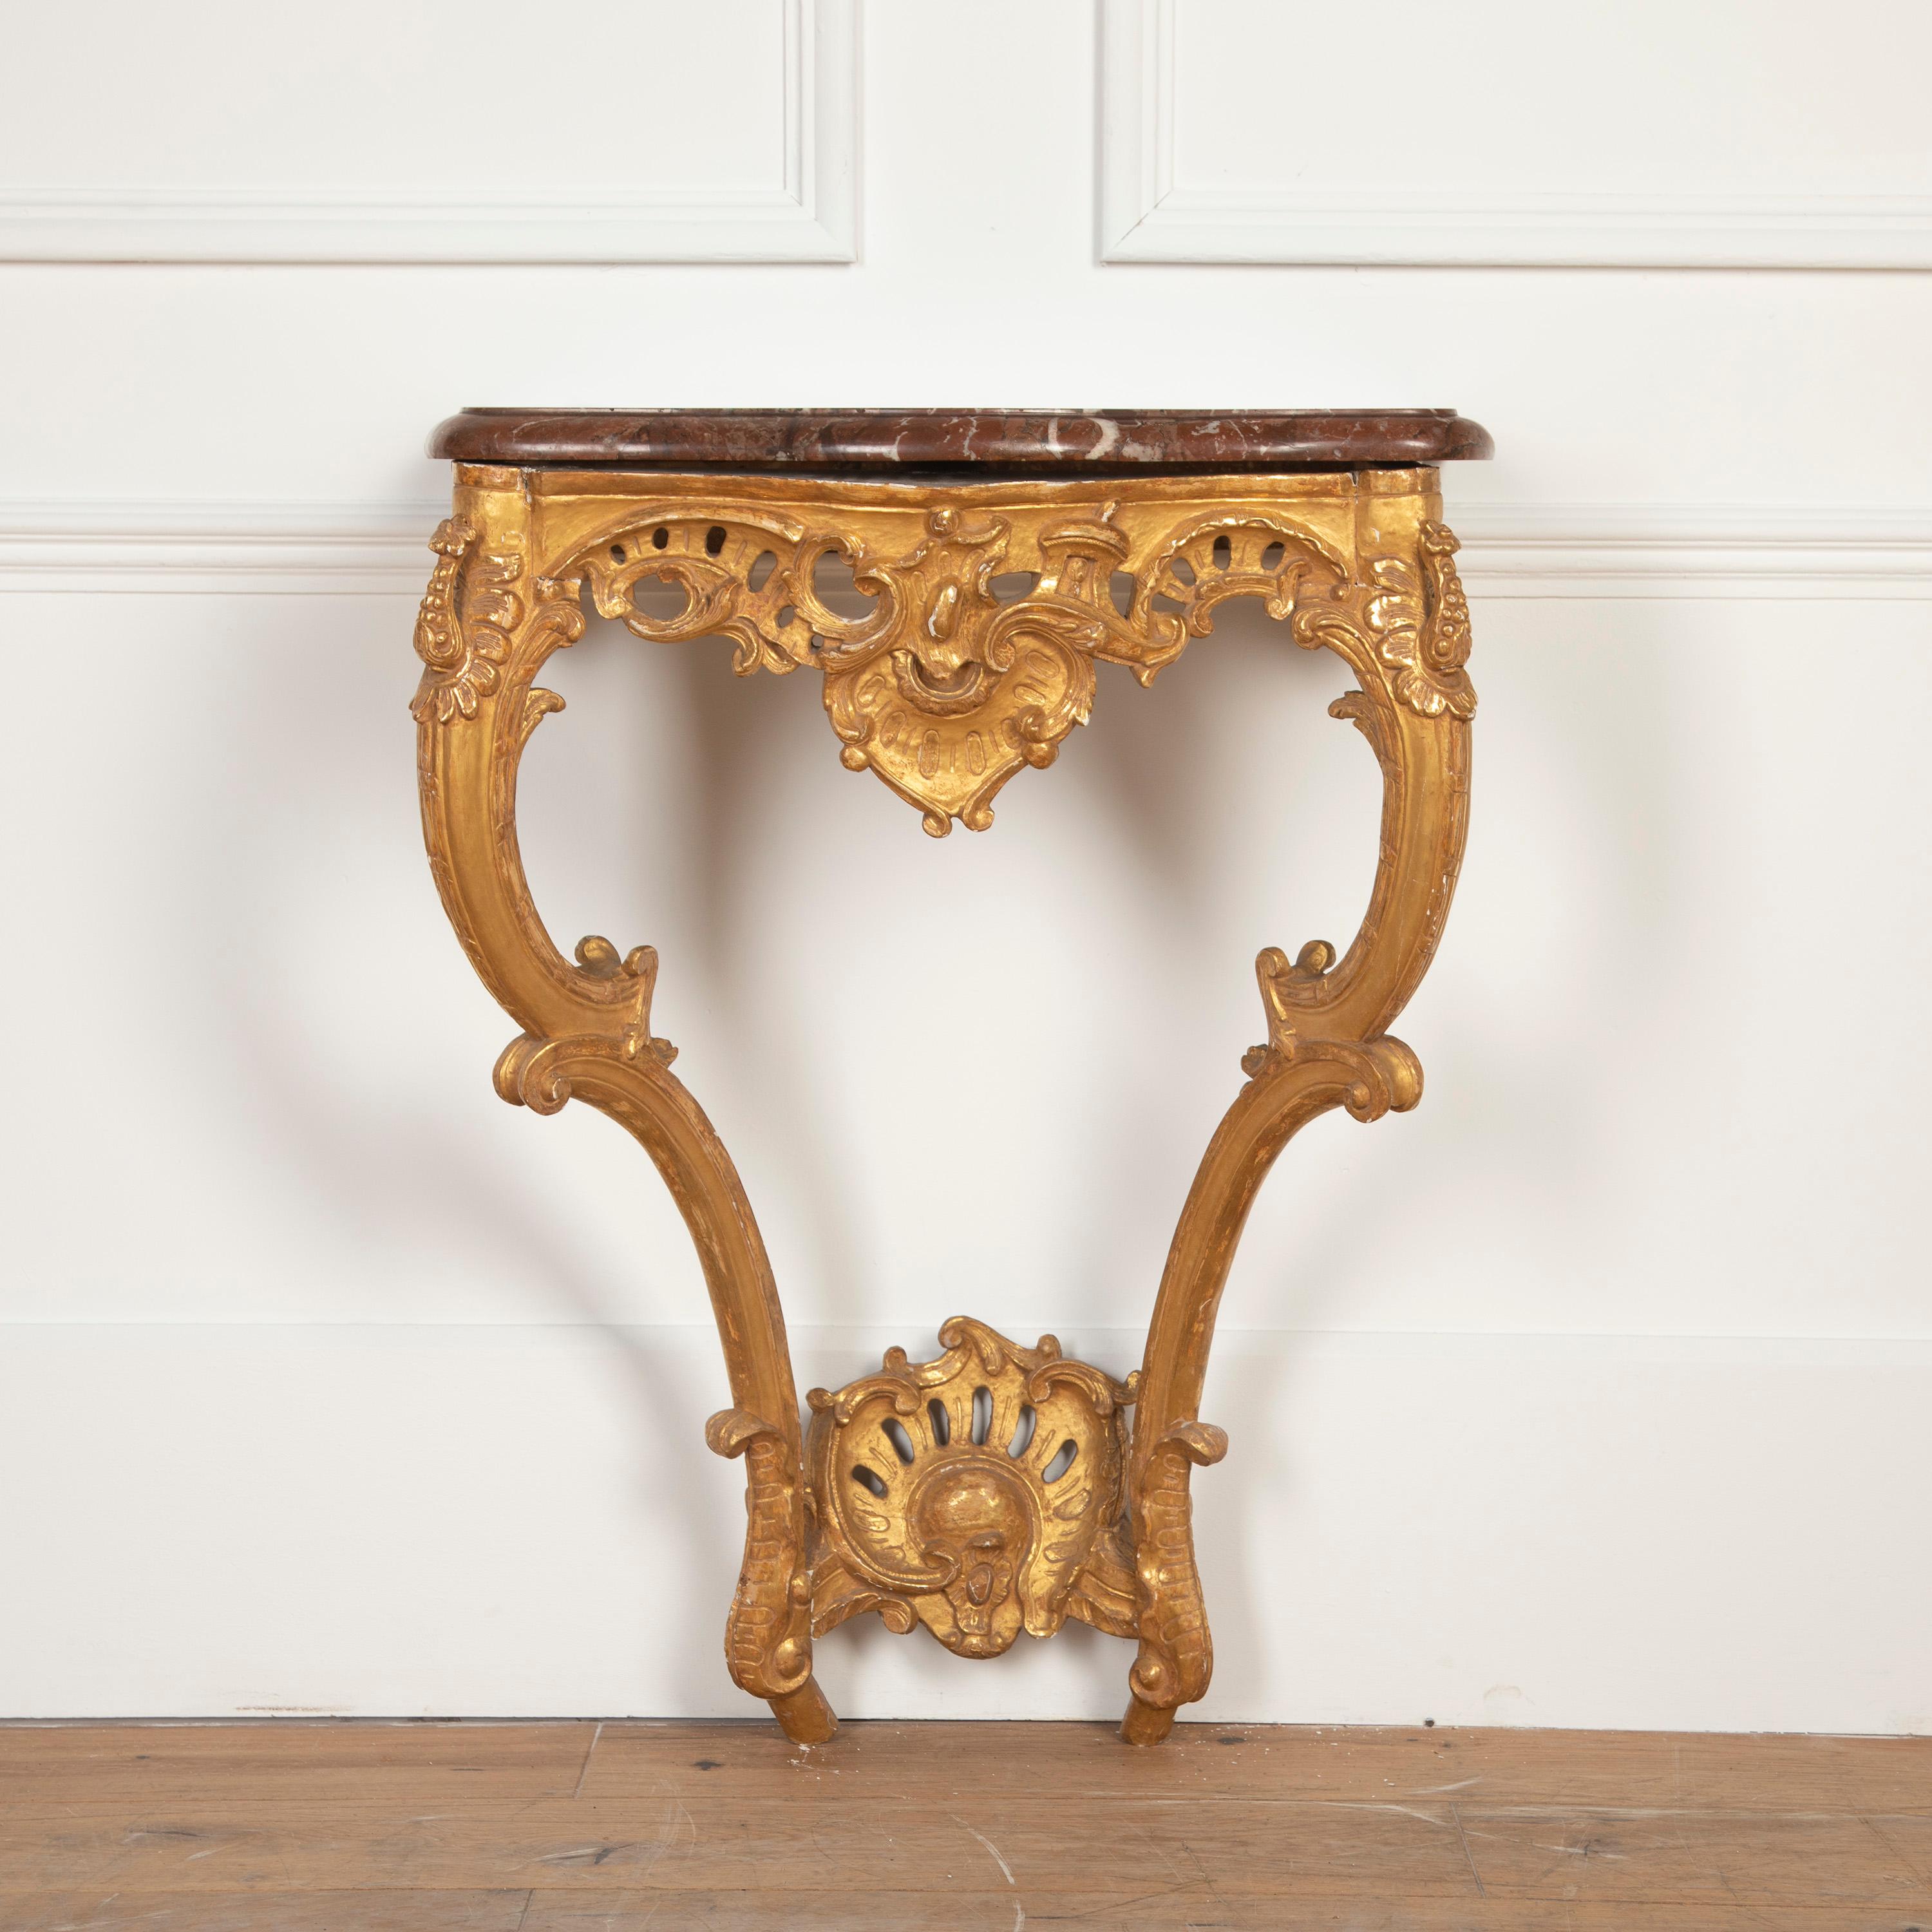 Superb early 19th century English gilt console table. 

This charming piece is of elegant proportions and features hand-carved detailing throughout the wooden structure. Sitting above the wooden structure is a large piece of marble that is